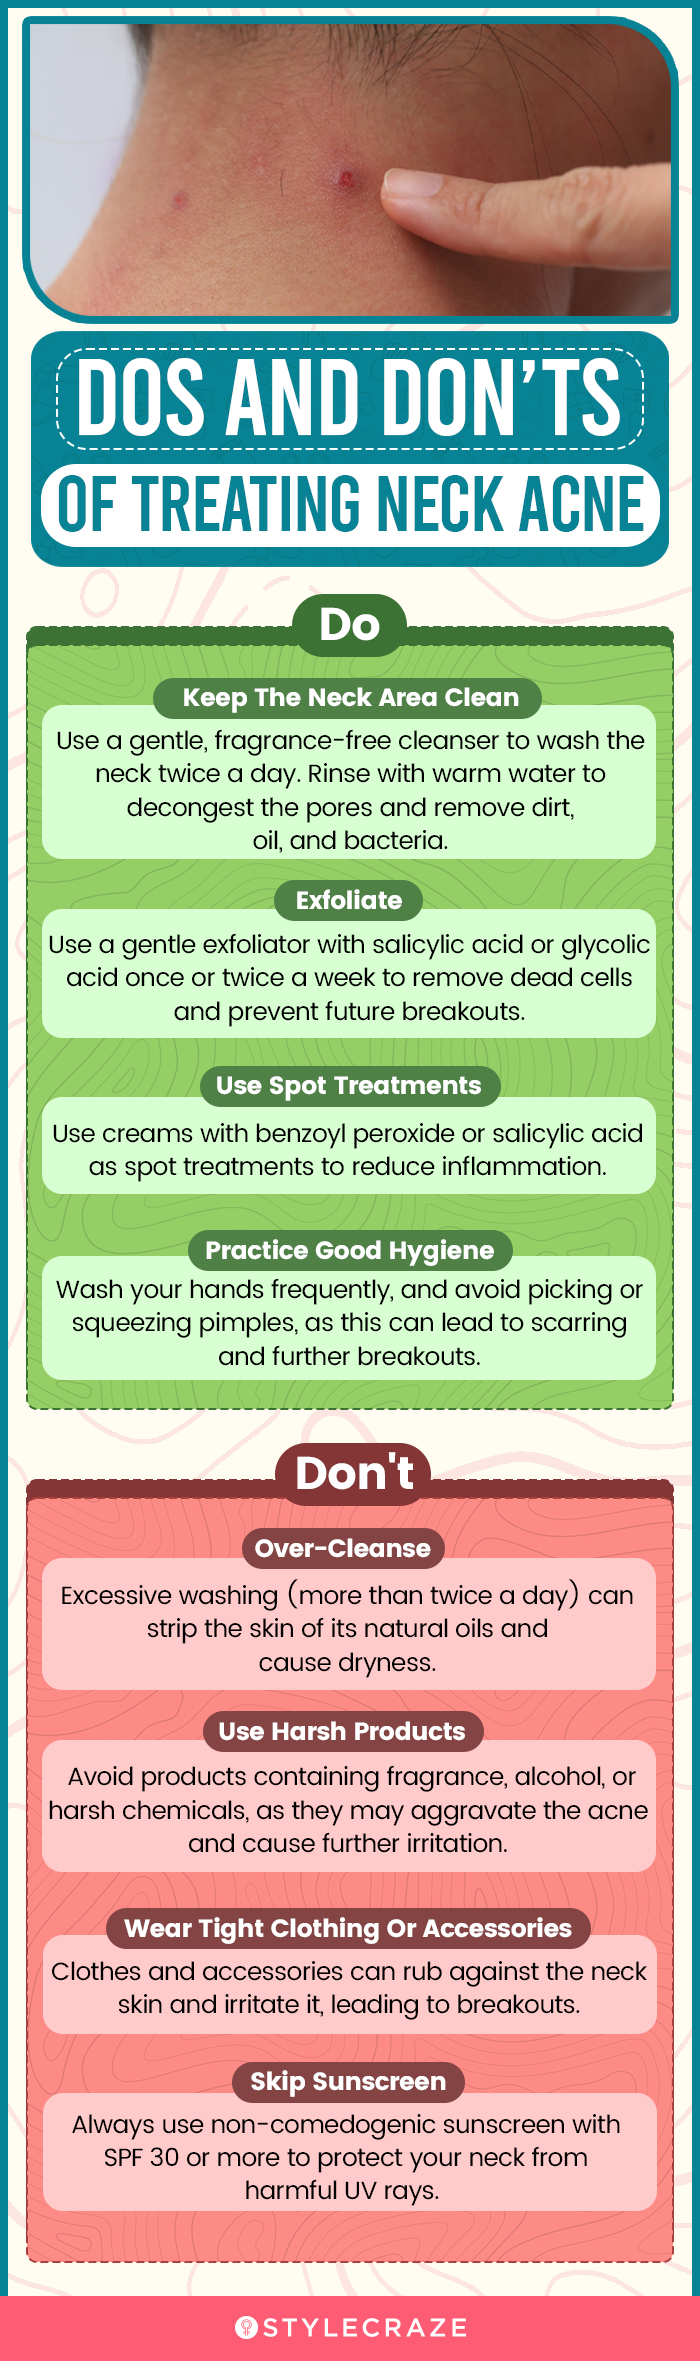 dos and don’ts of treating neck acne (infographic)